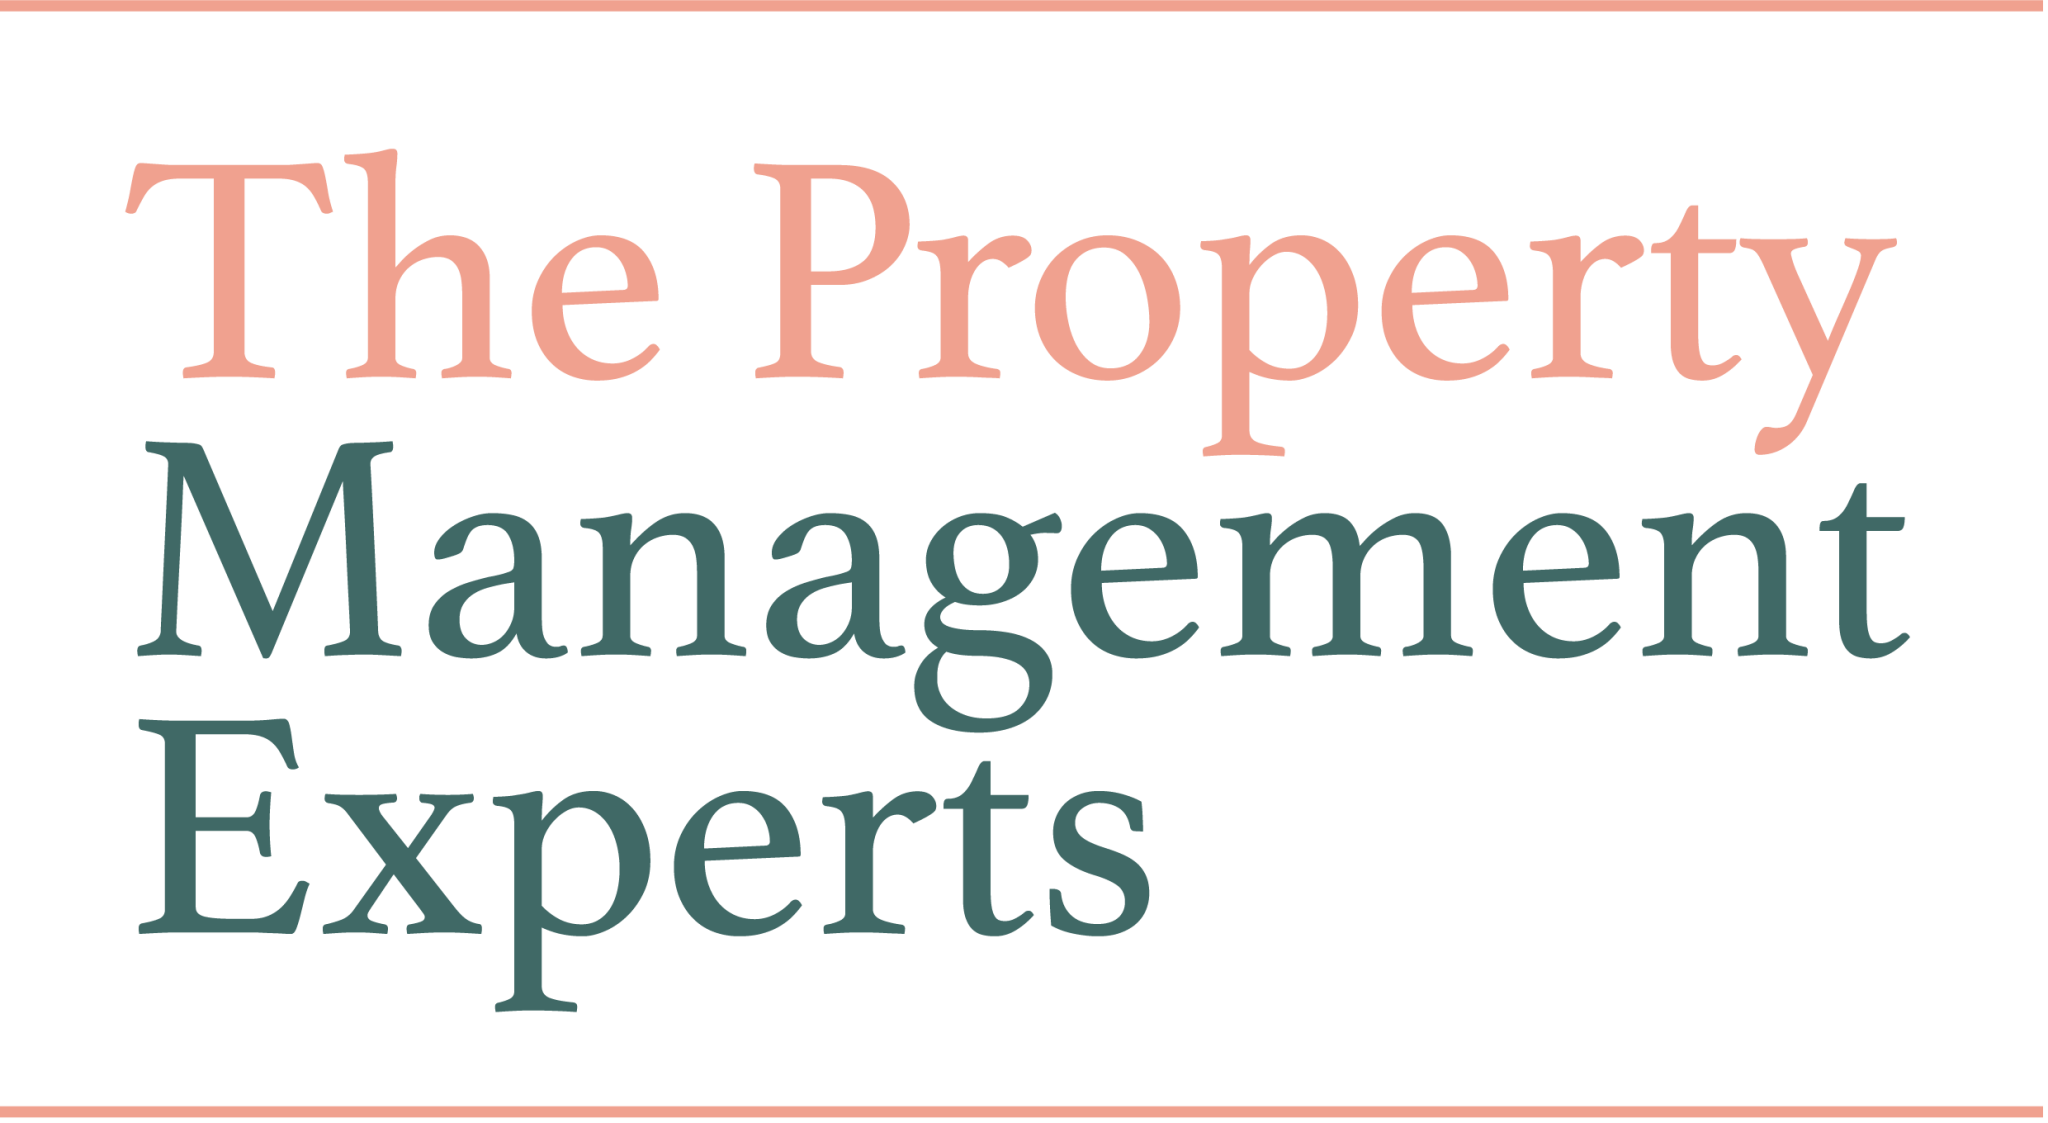 The Property Management Experts